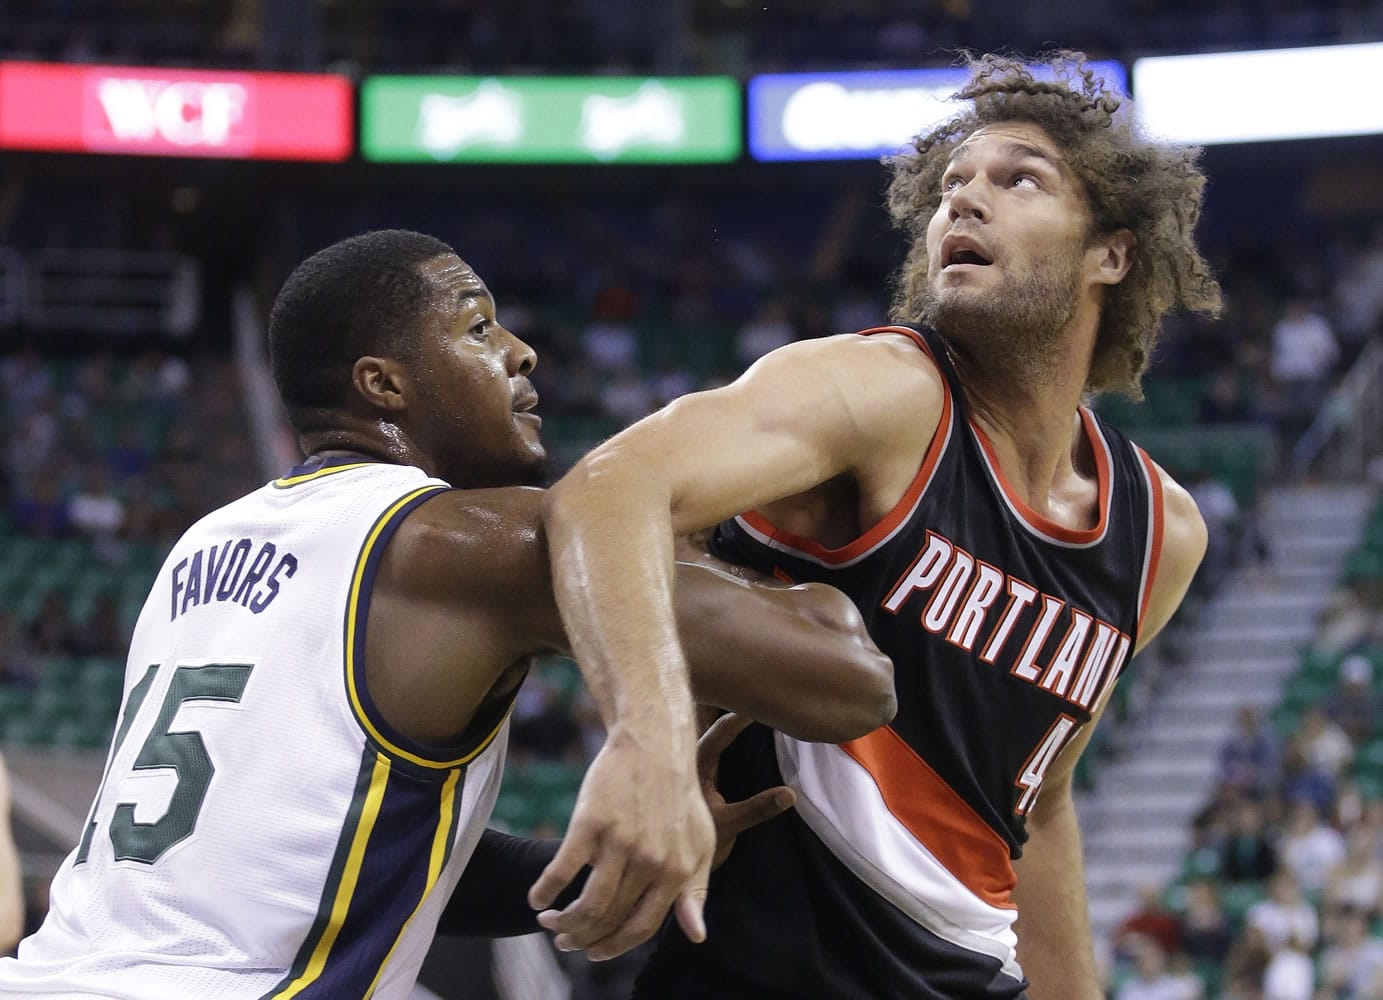 Portland's Robin Lopez takes up space in the paint, which allows him to set screens for shooters and get easy baskets from offensive rebounds.